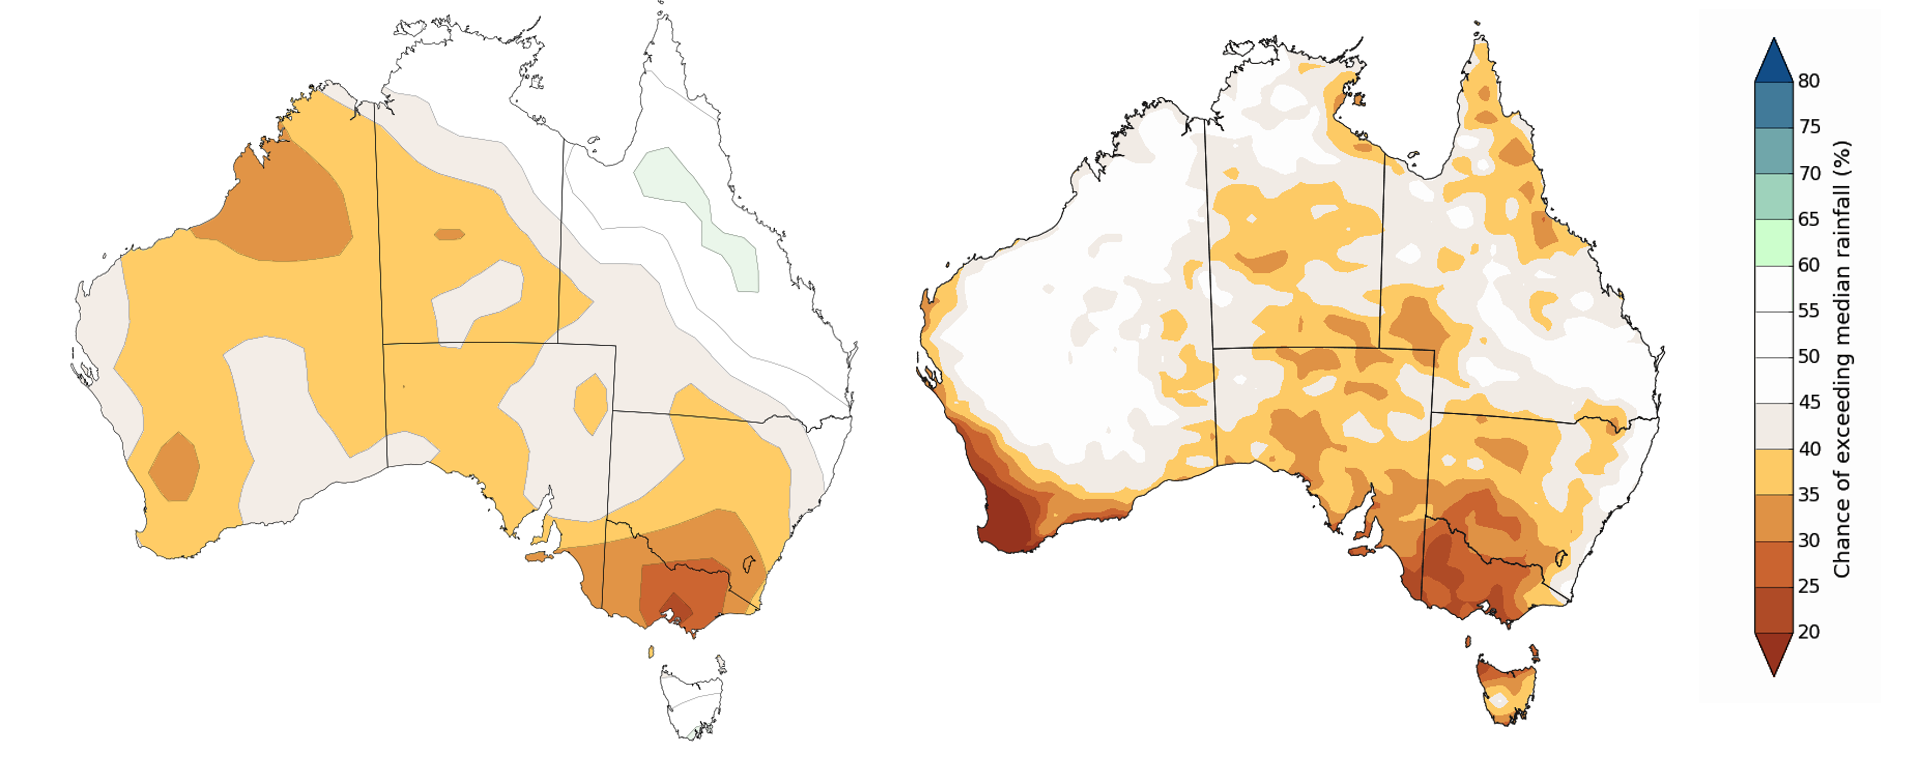 Two maps side by side showing the spring rainfall outlook for 2018 produced from the old model (much less detailed) and the new model (greater detail), described in the text above and below